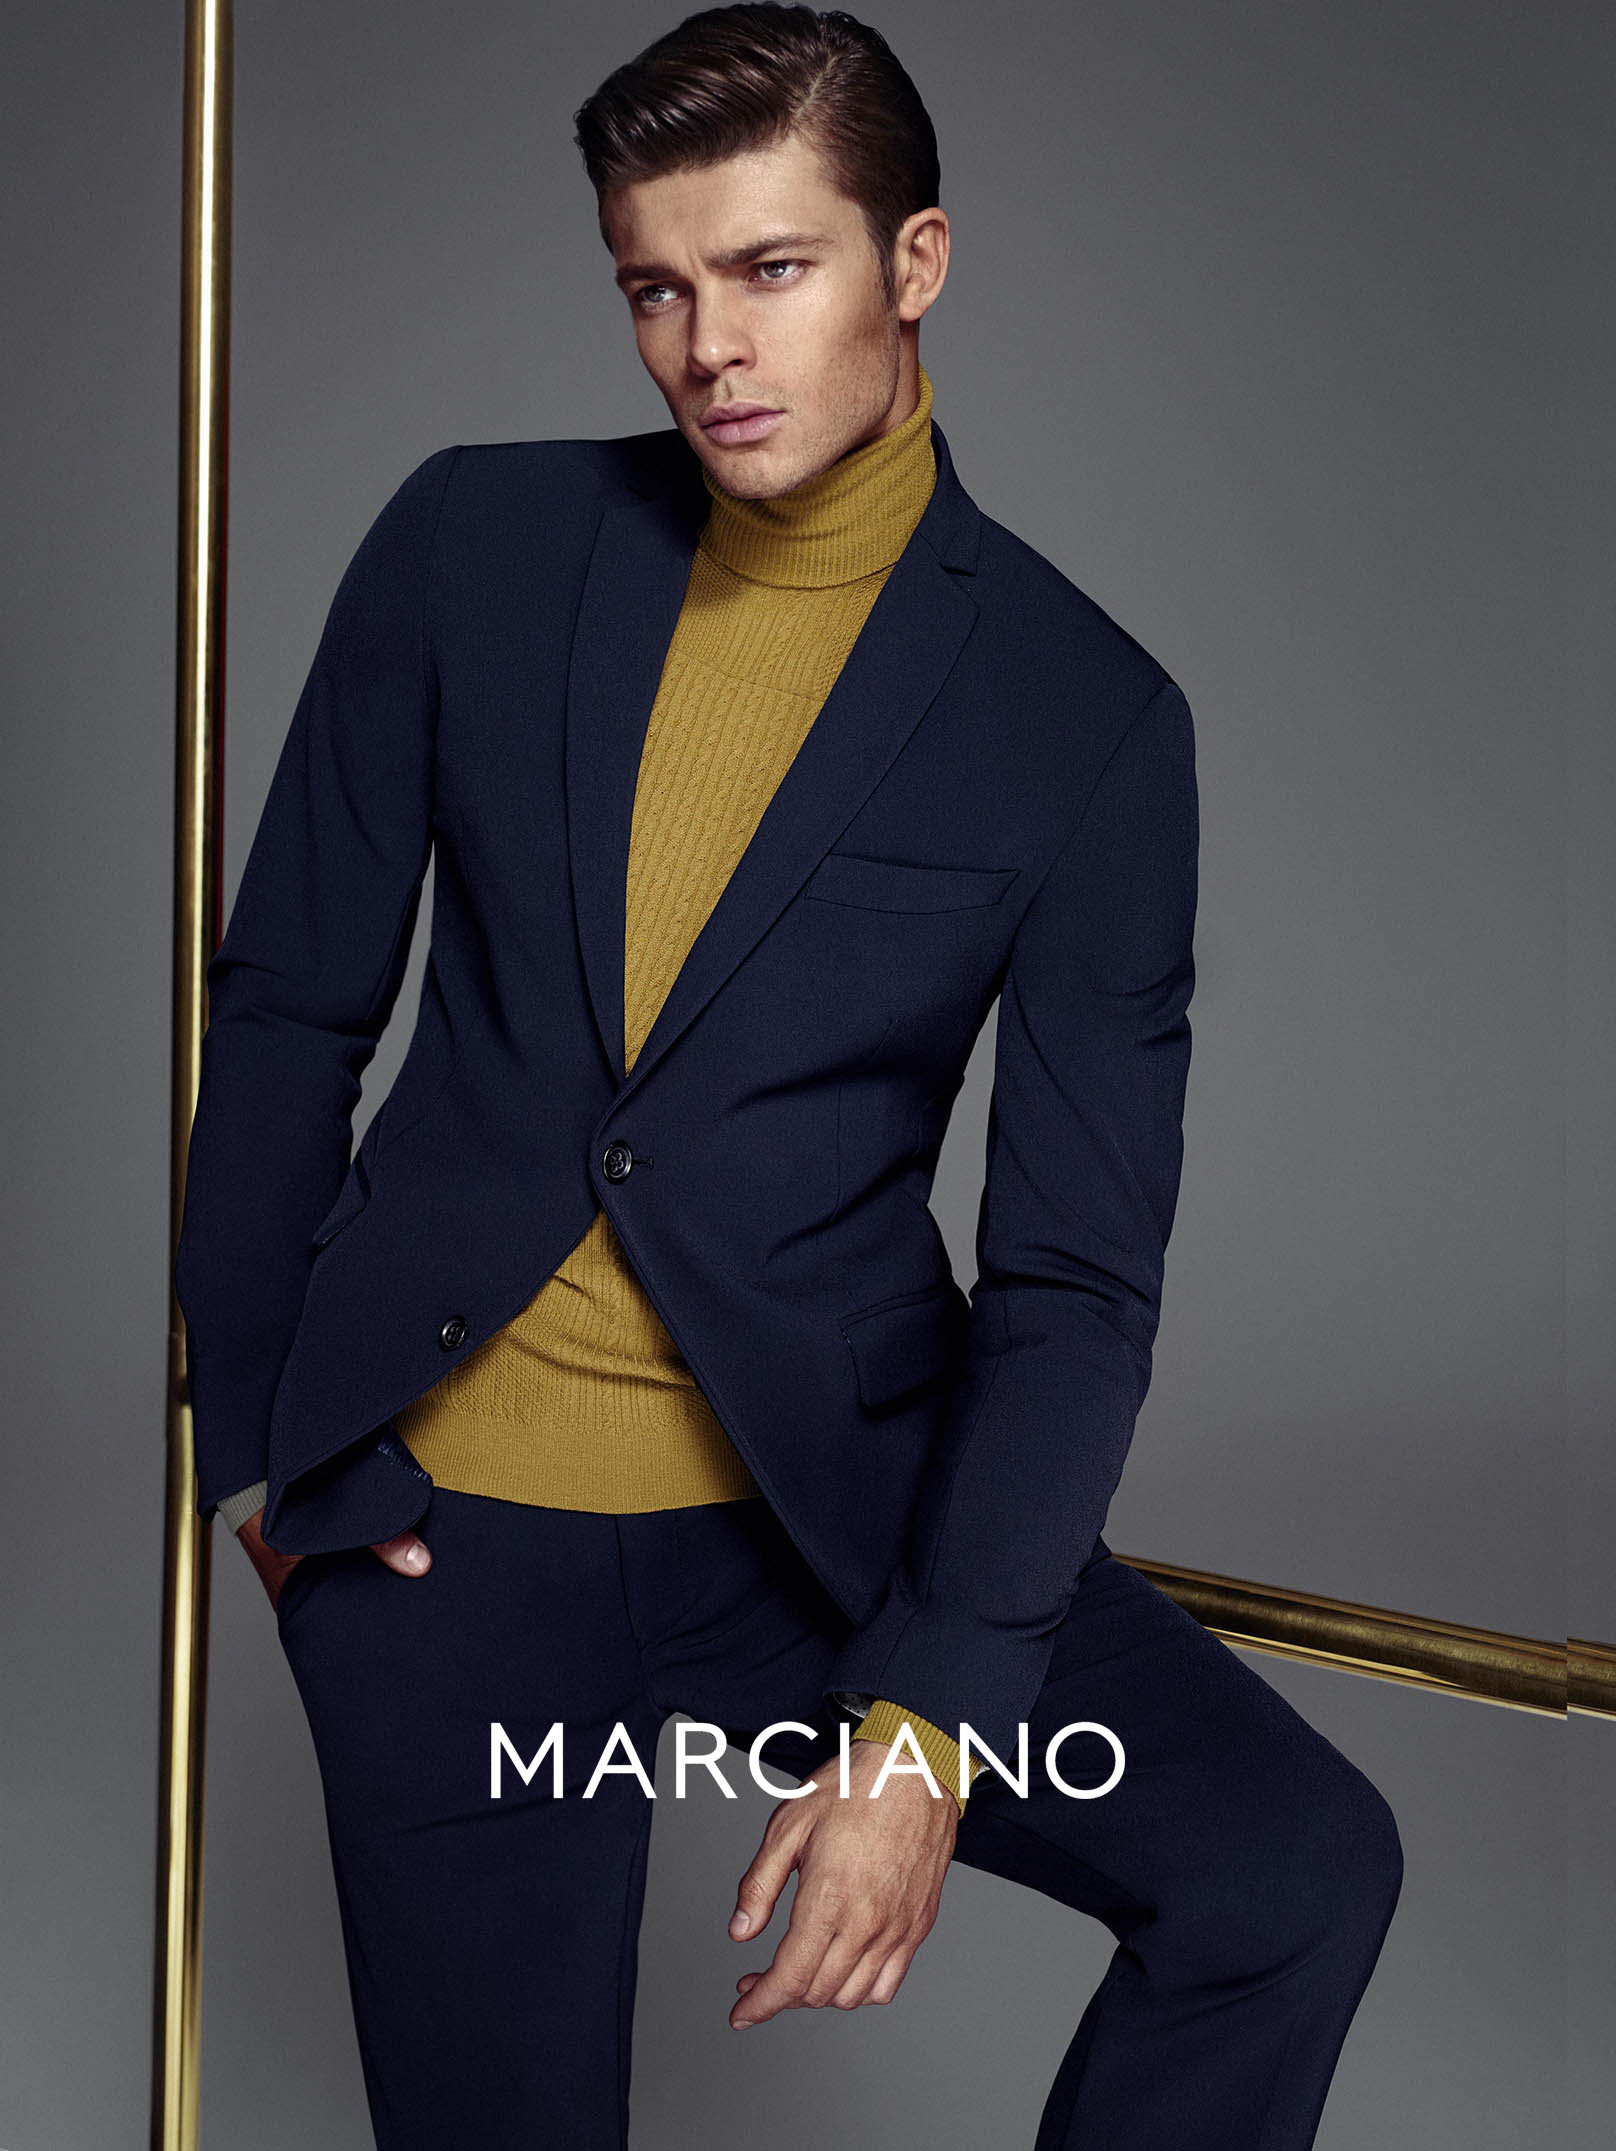 Guess Marciano Fall Winter 2014 Campaign Eugen Bauder